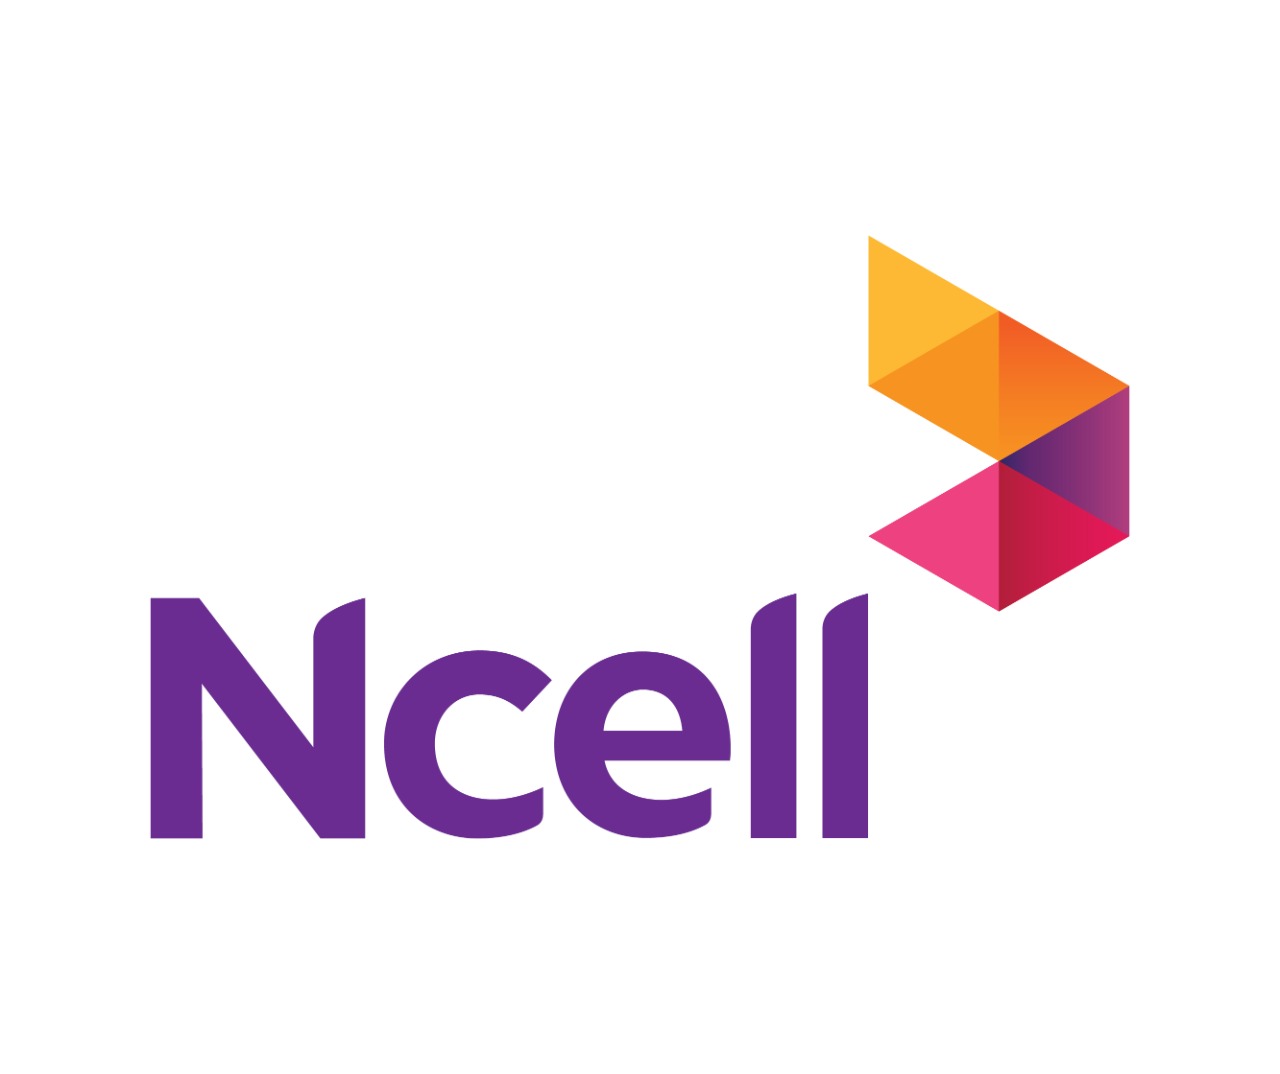 Axiata to exit from Ncell amid revenue decline